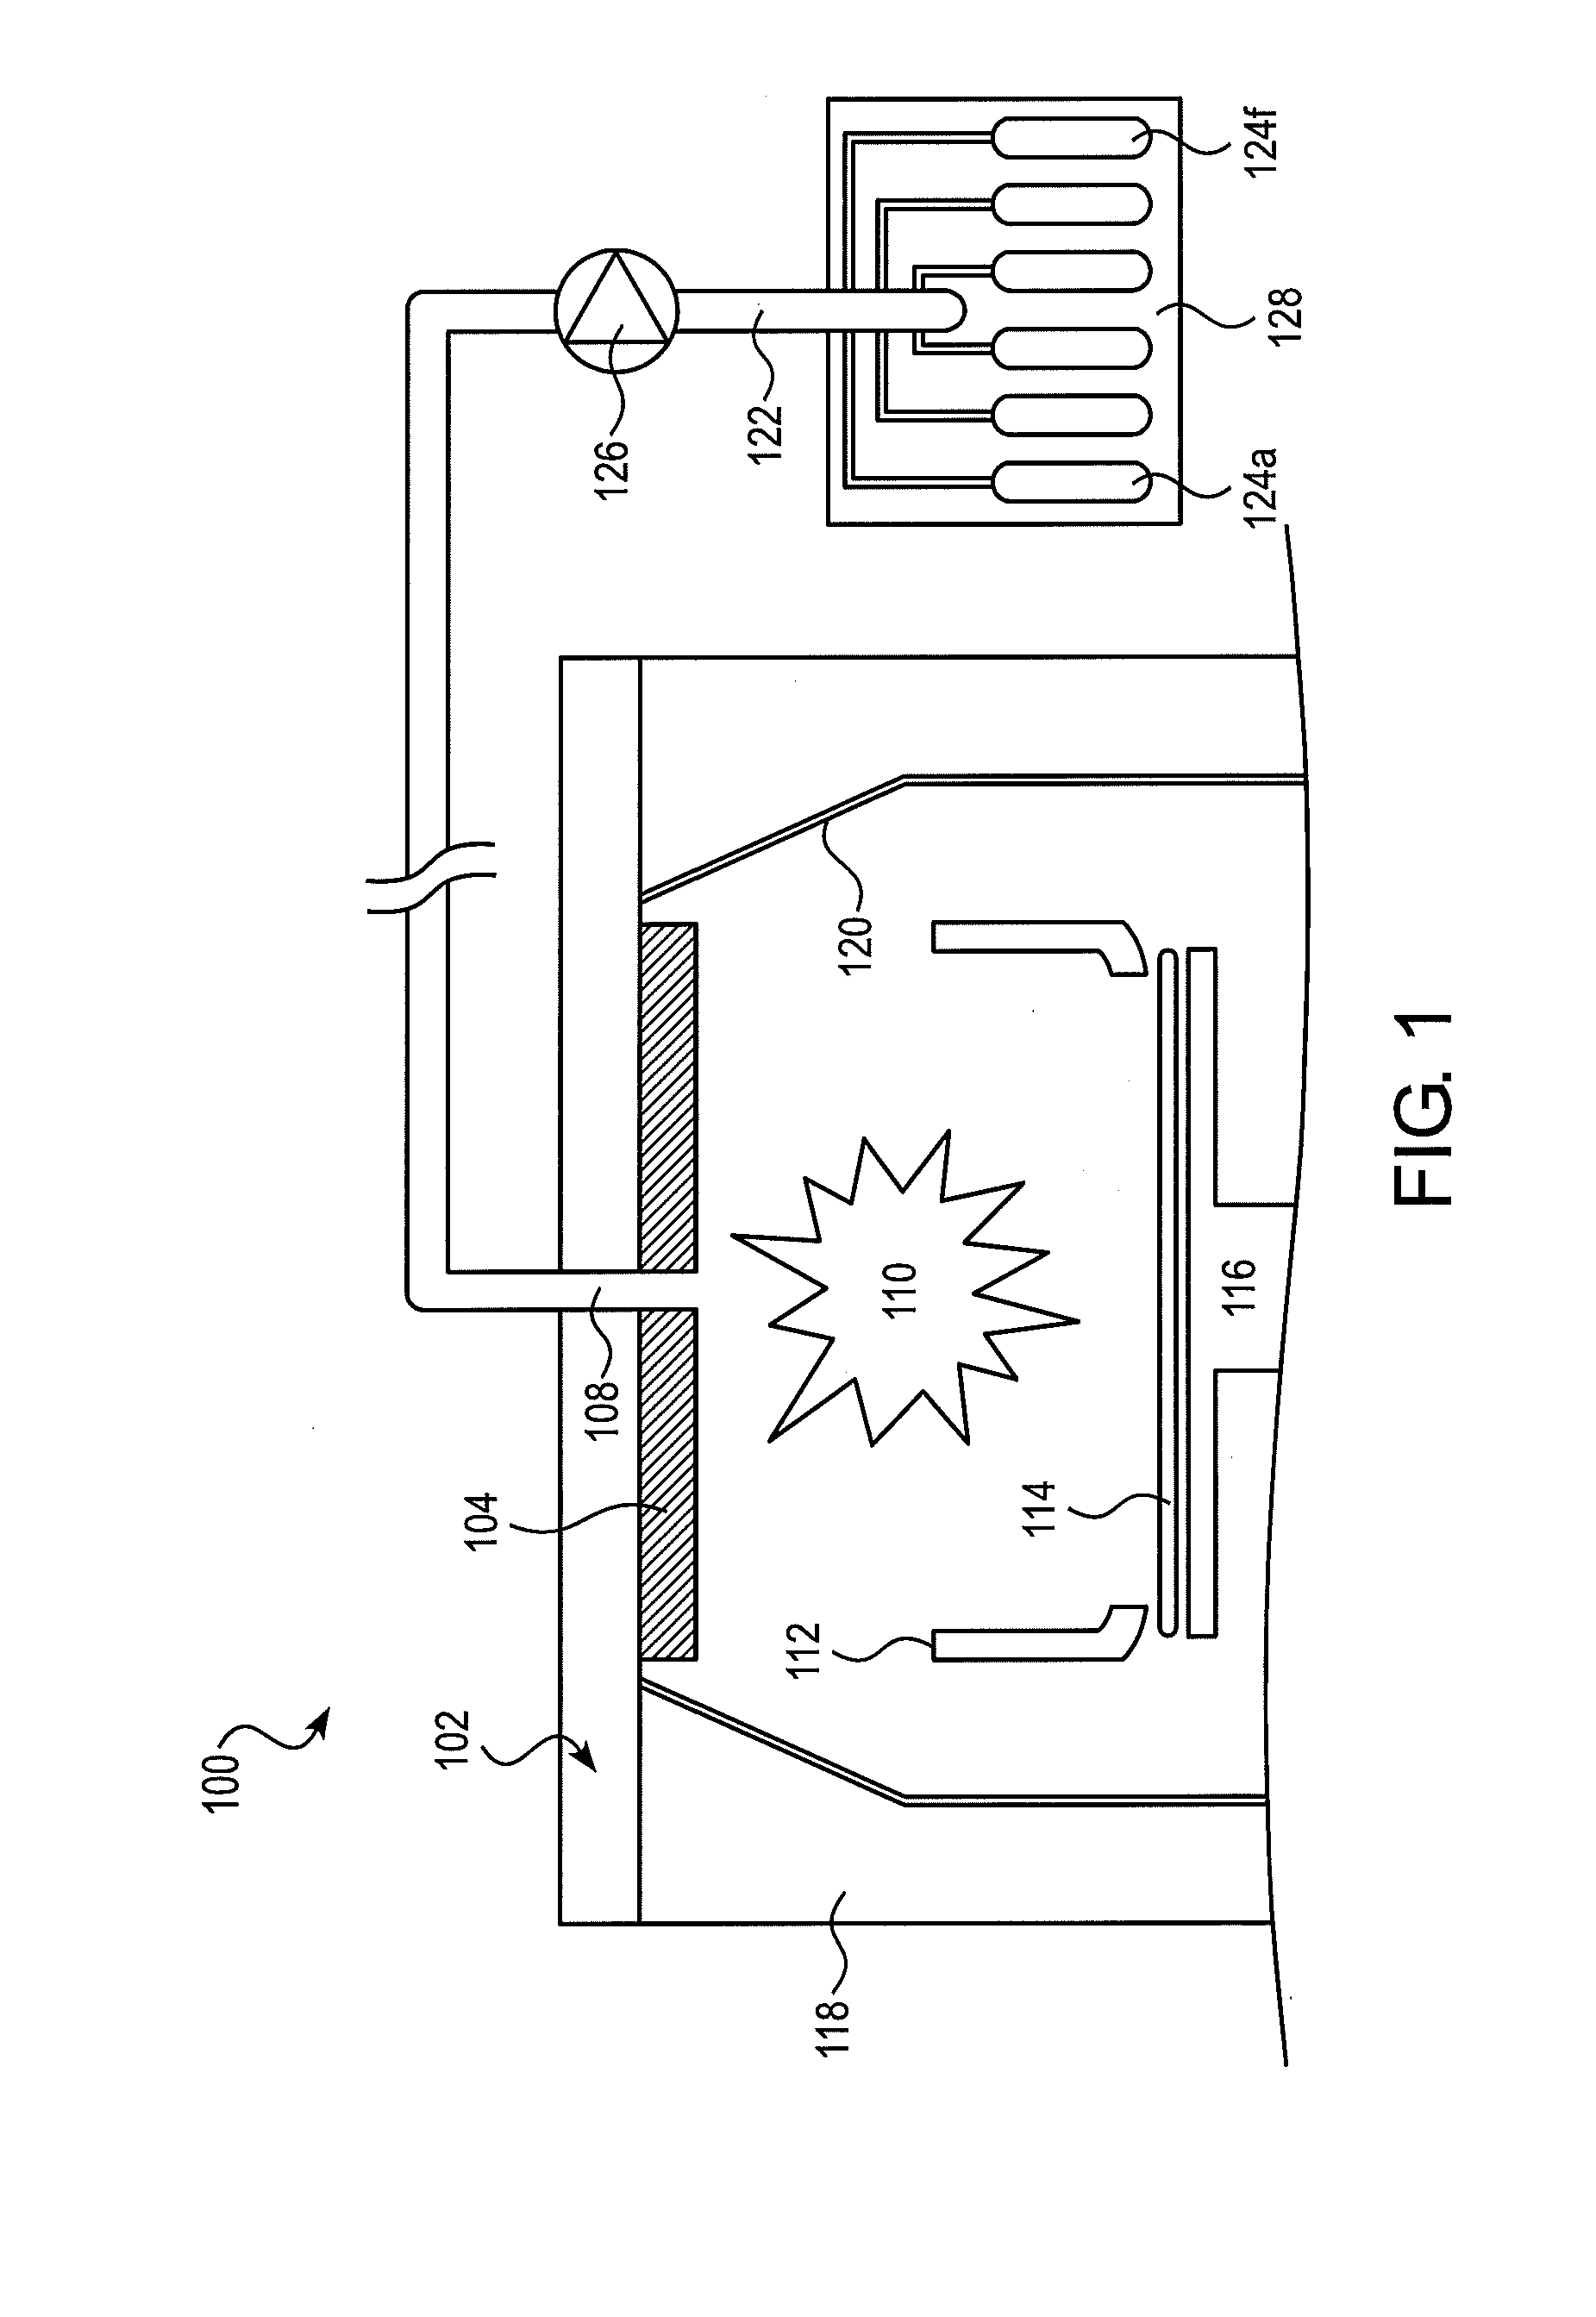 Coating method for gas delivery system